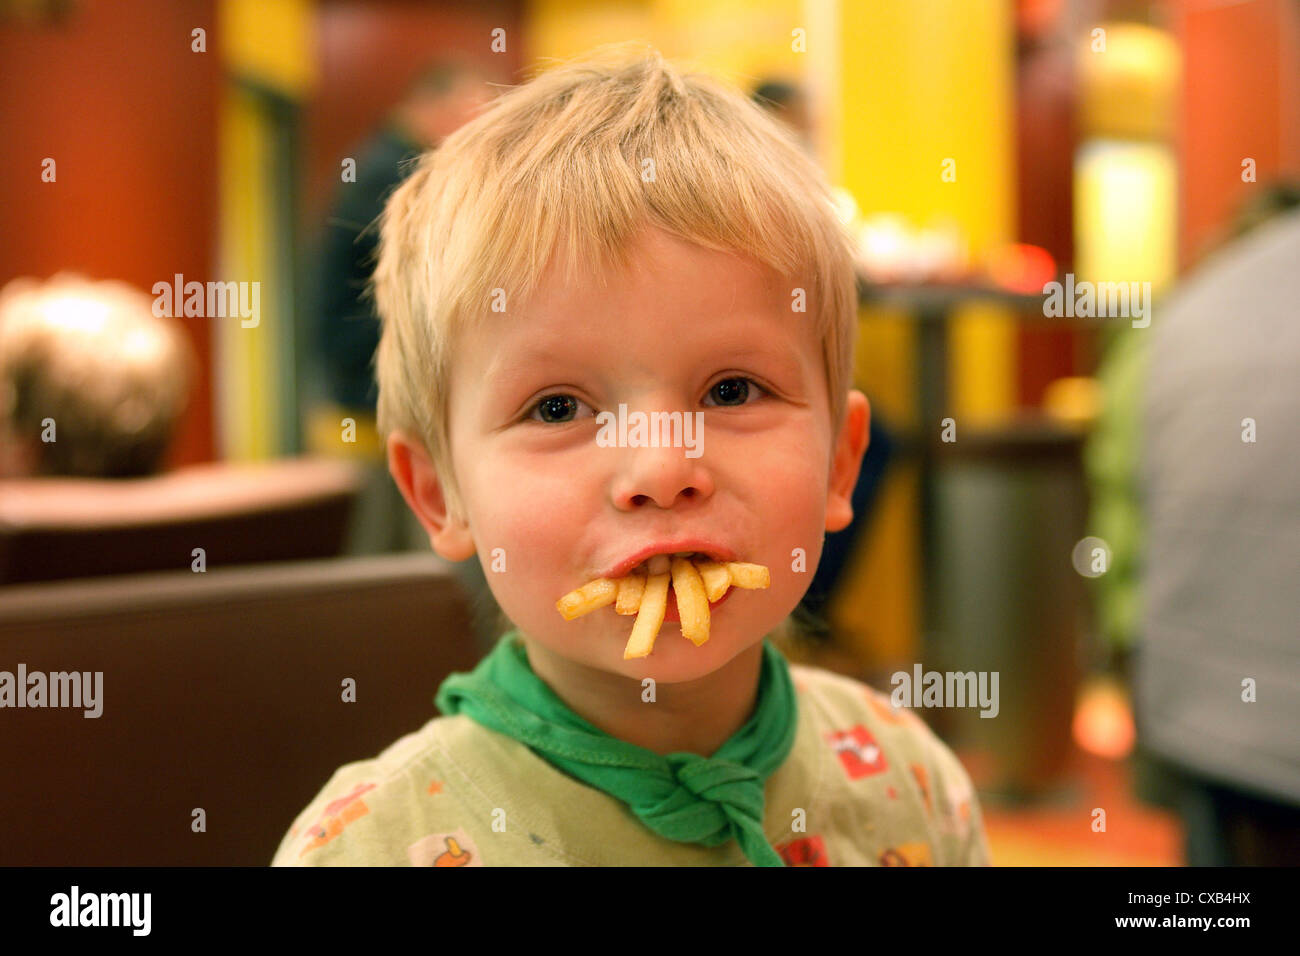 Berlin, a child eats French fries Stock Photo